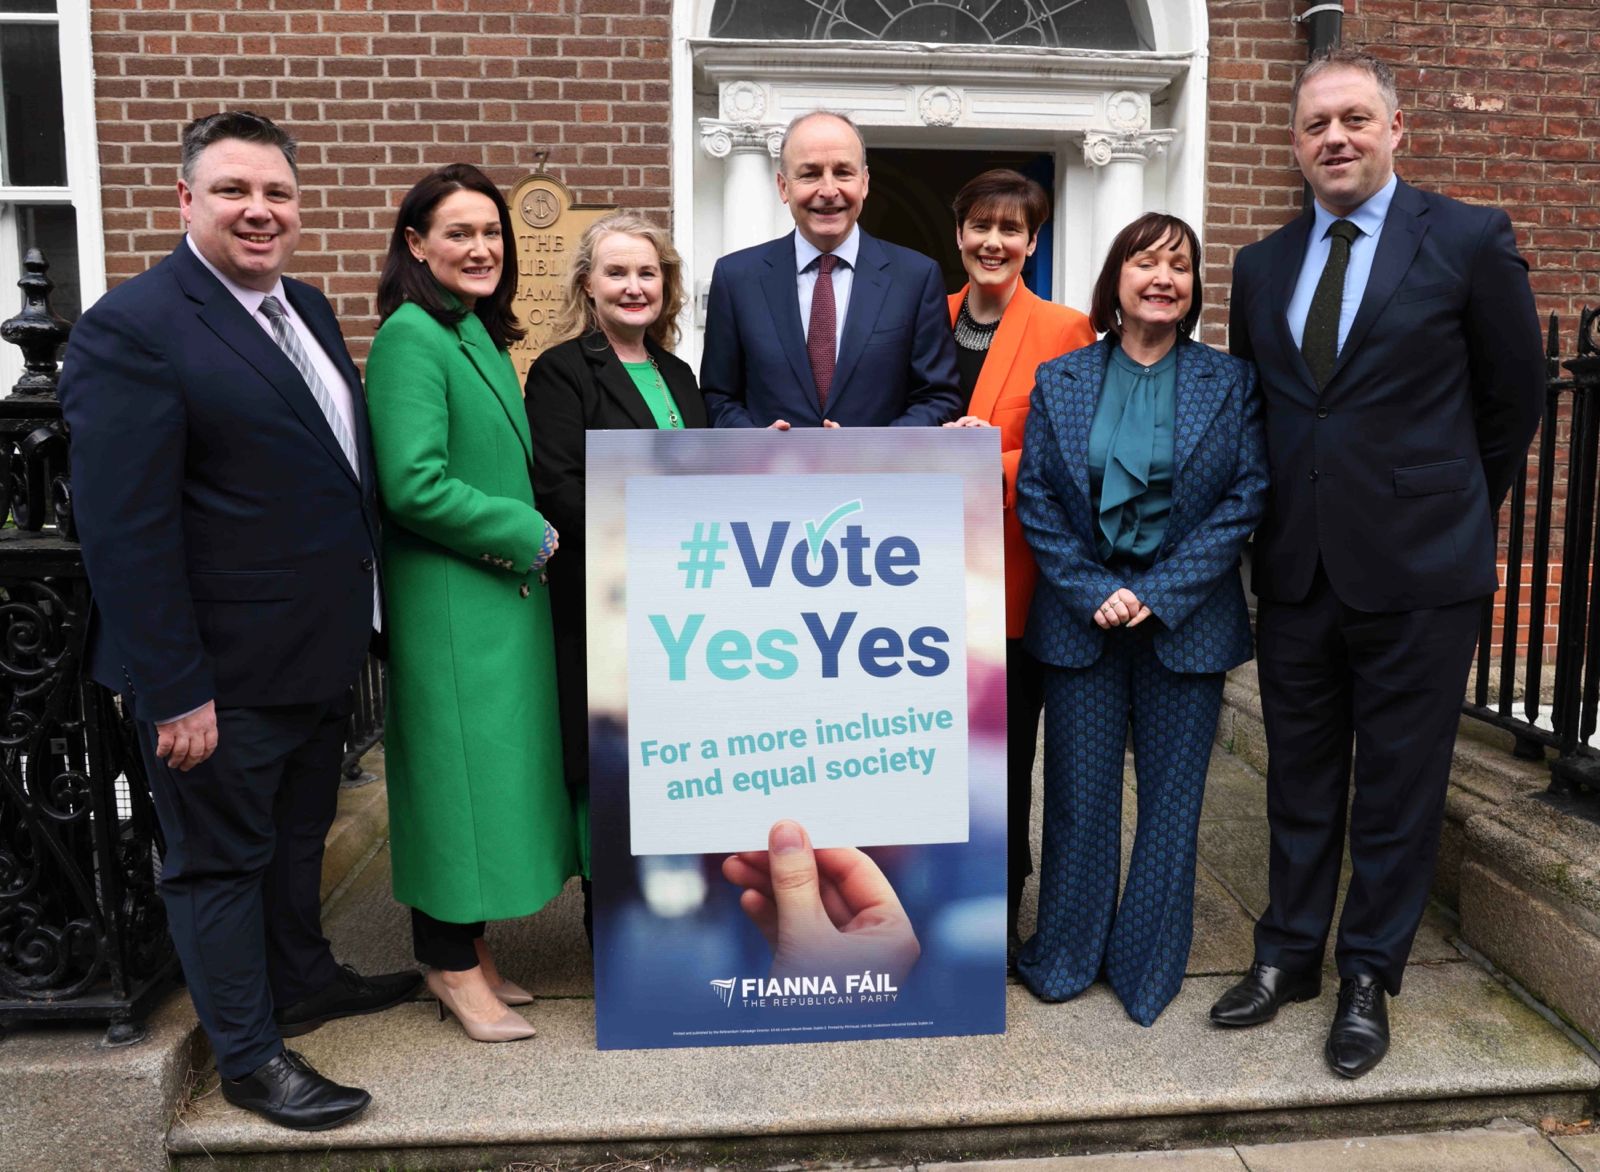 Fianna Fáil launches its campaign for the upcoming referendums on Family and Care